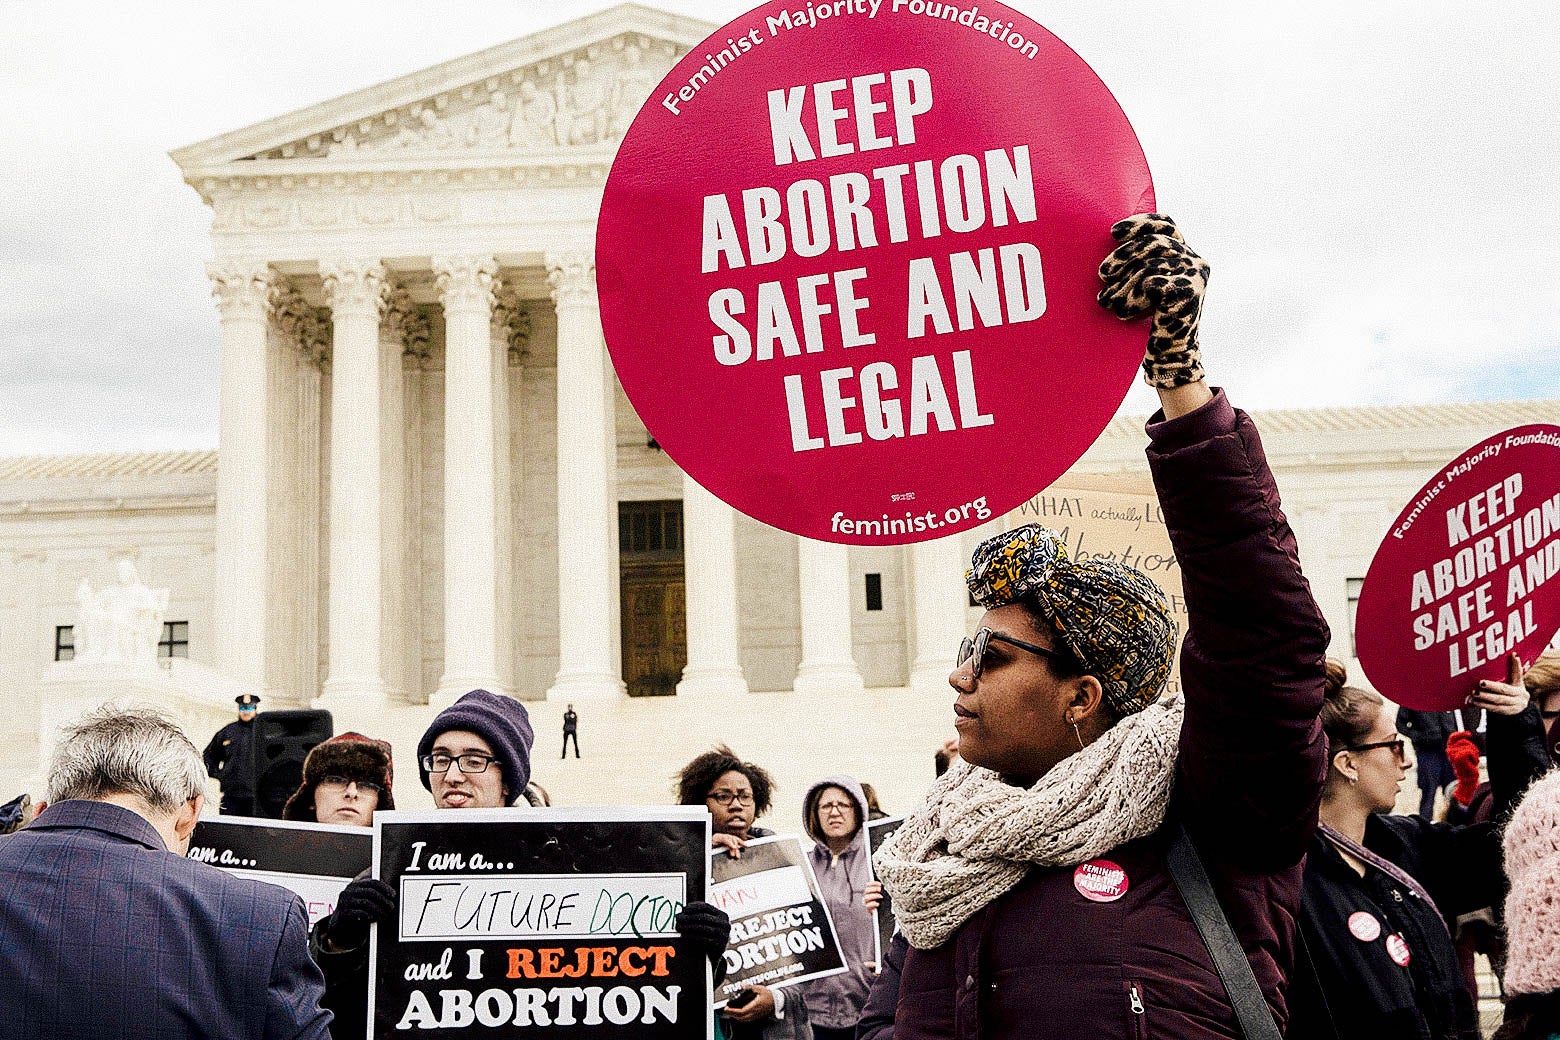 In front of the Supreme Court, a crowd of abortion rights supporters holding signs reading "KEEP ABORTION SAFE AND LEGAL" and anti-abortion activists holding signs reading "I am a future ___ and I REJECT ABORTION."